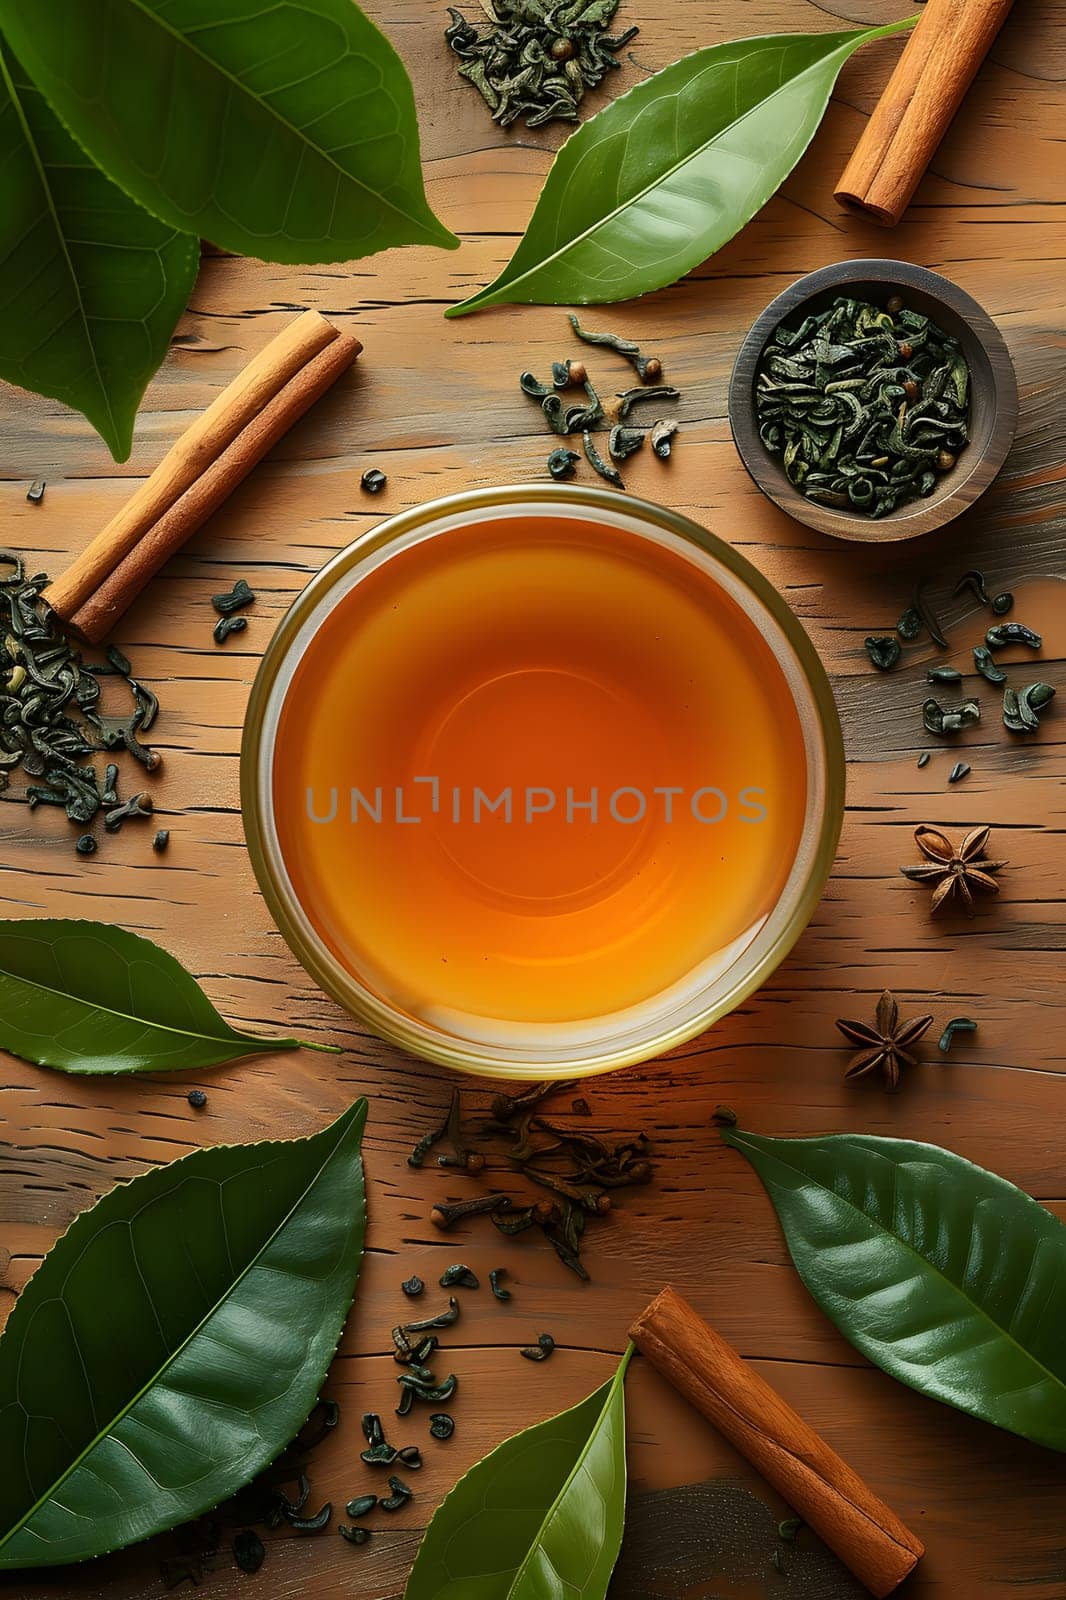 Green tea leaves and cinnamon sticks surround a cup of tea on a wooden table by Nadtochiy